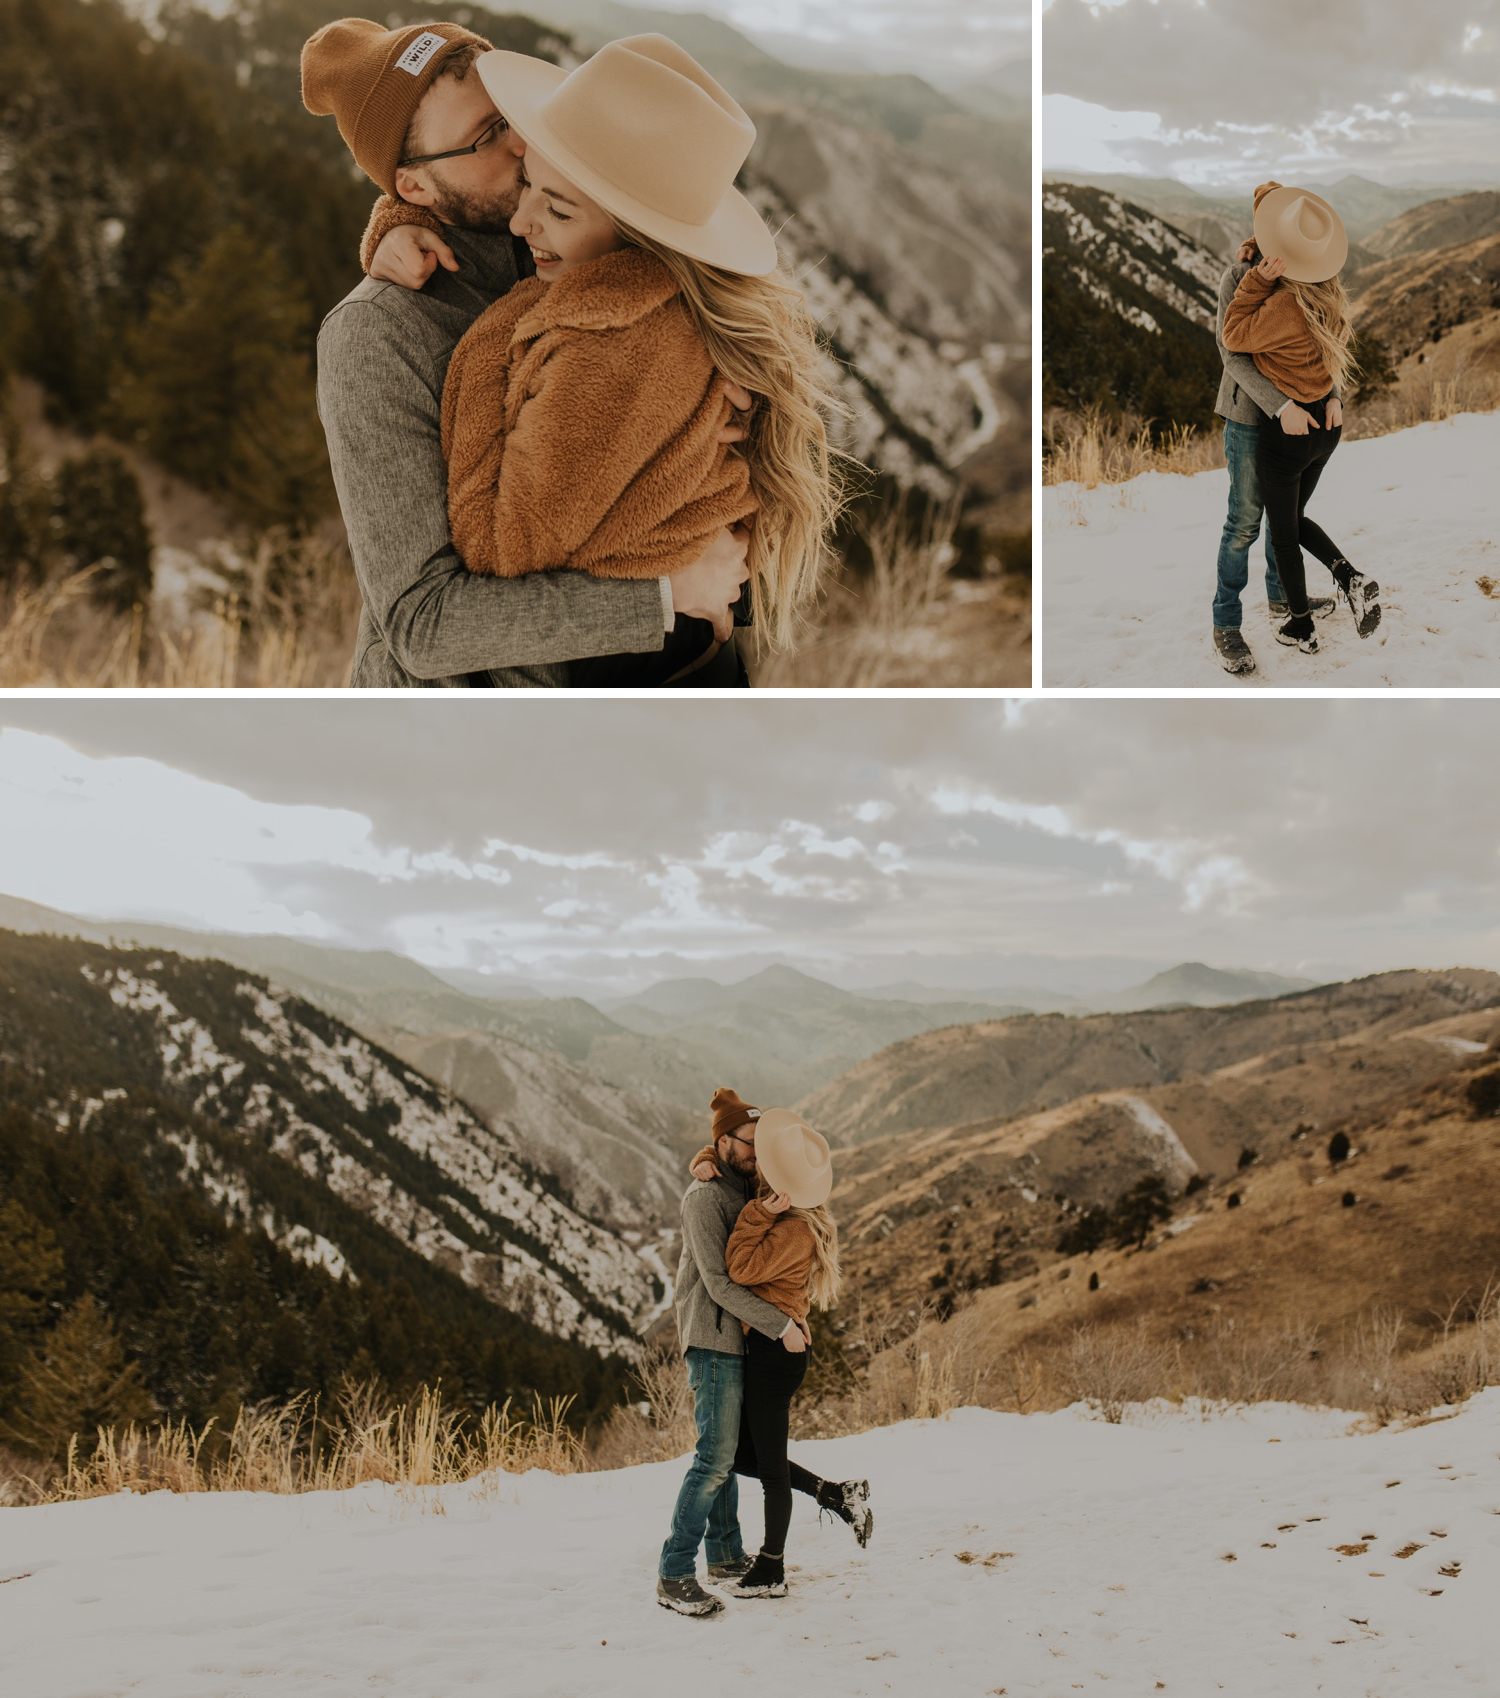 Colorado couples photoshoot in the mountains with photography business owner Becca Cannon.